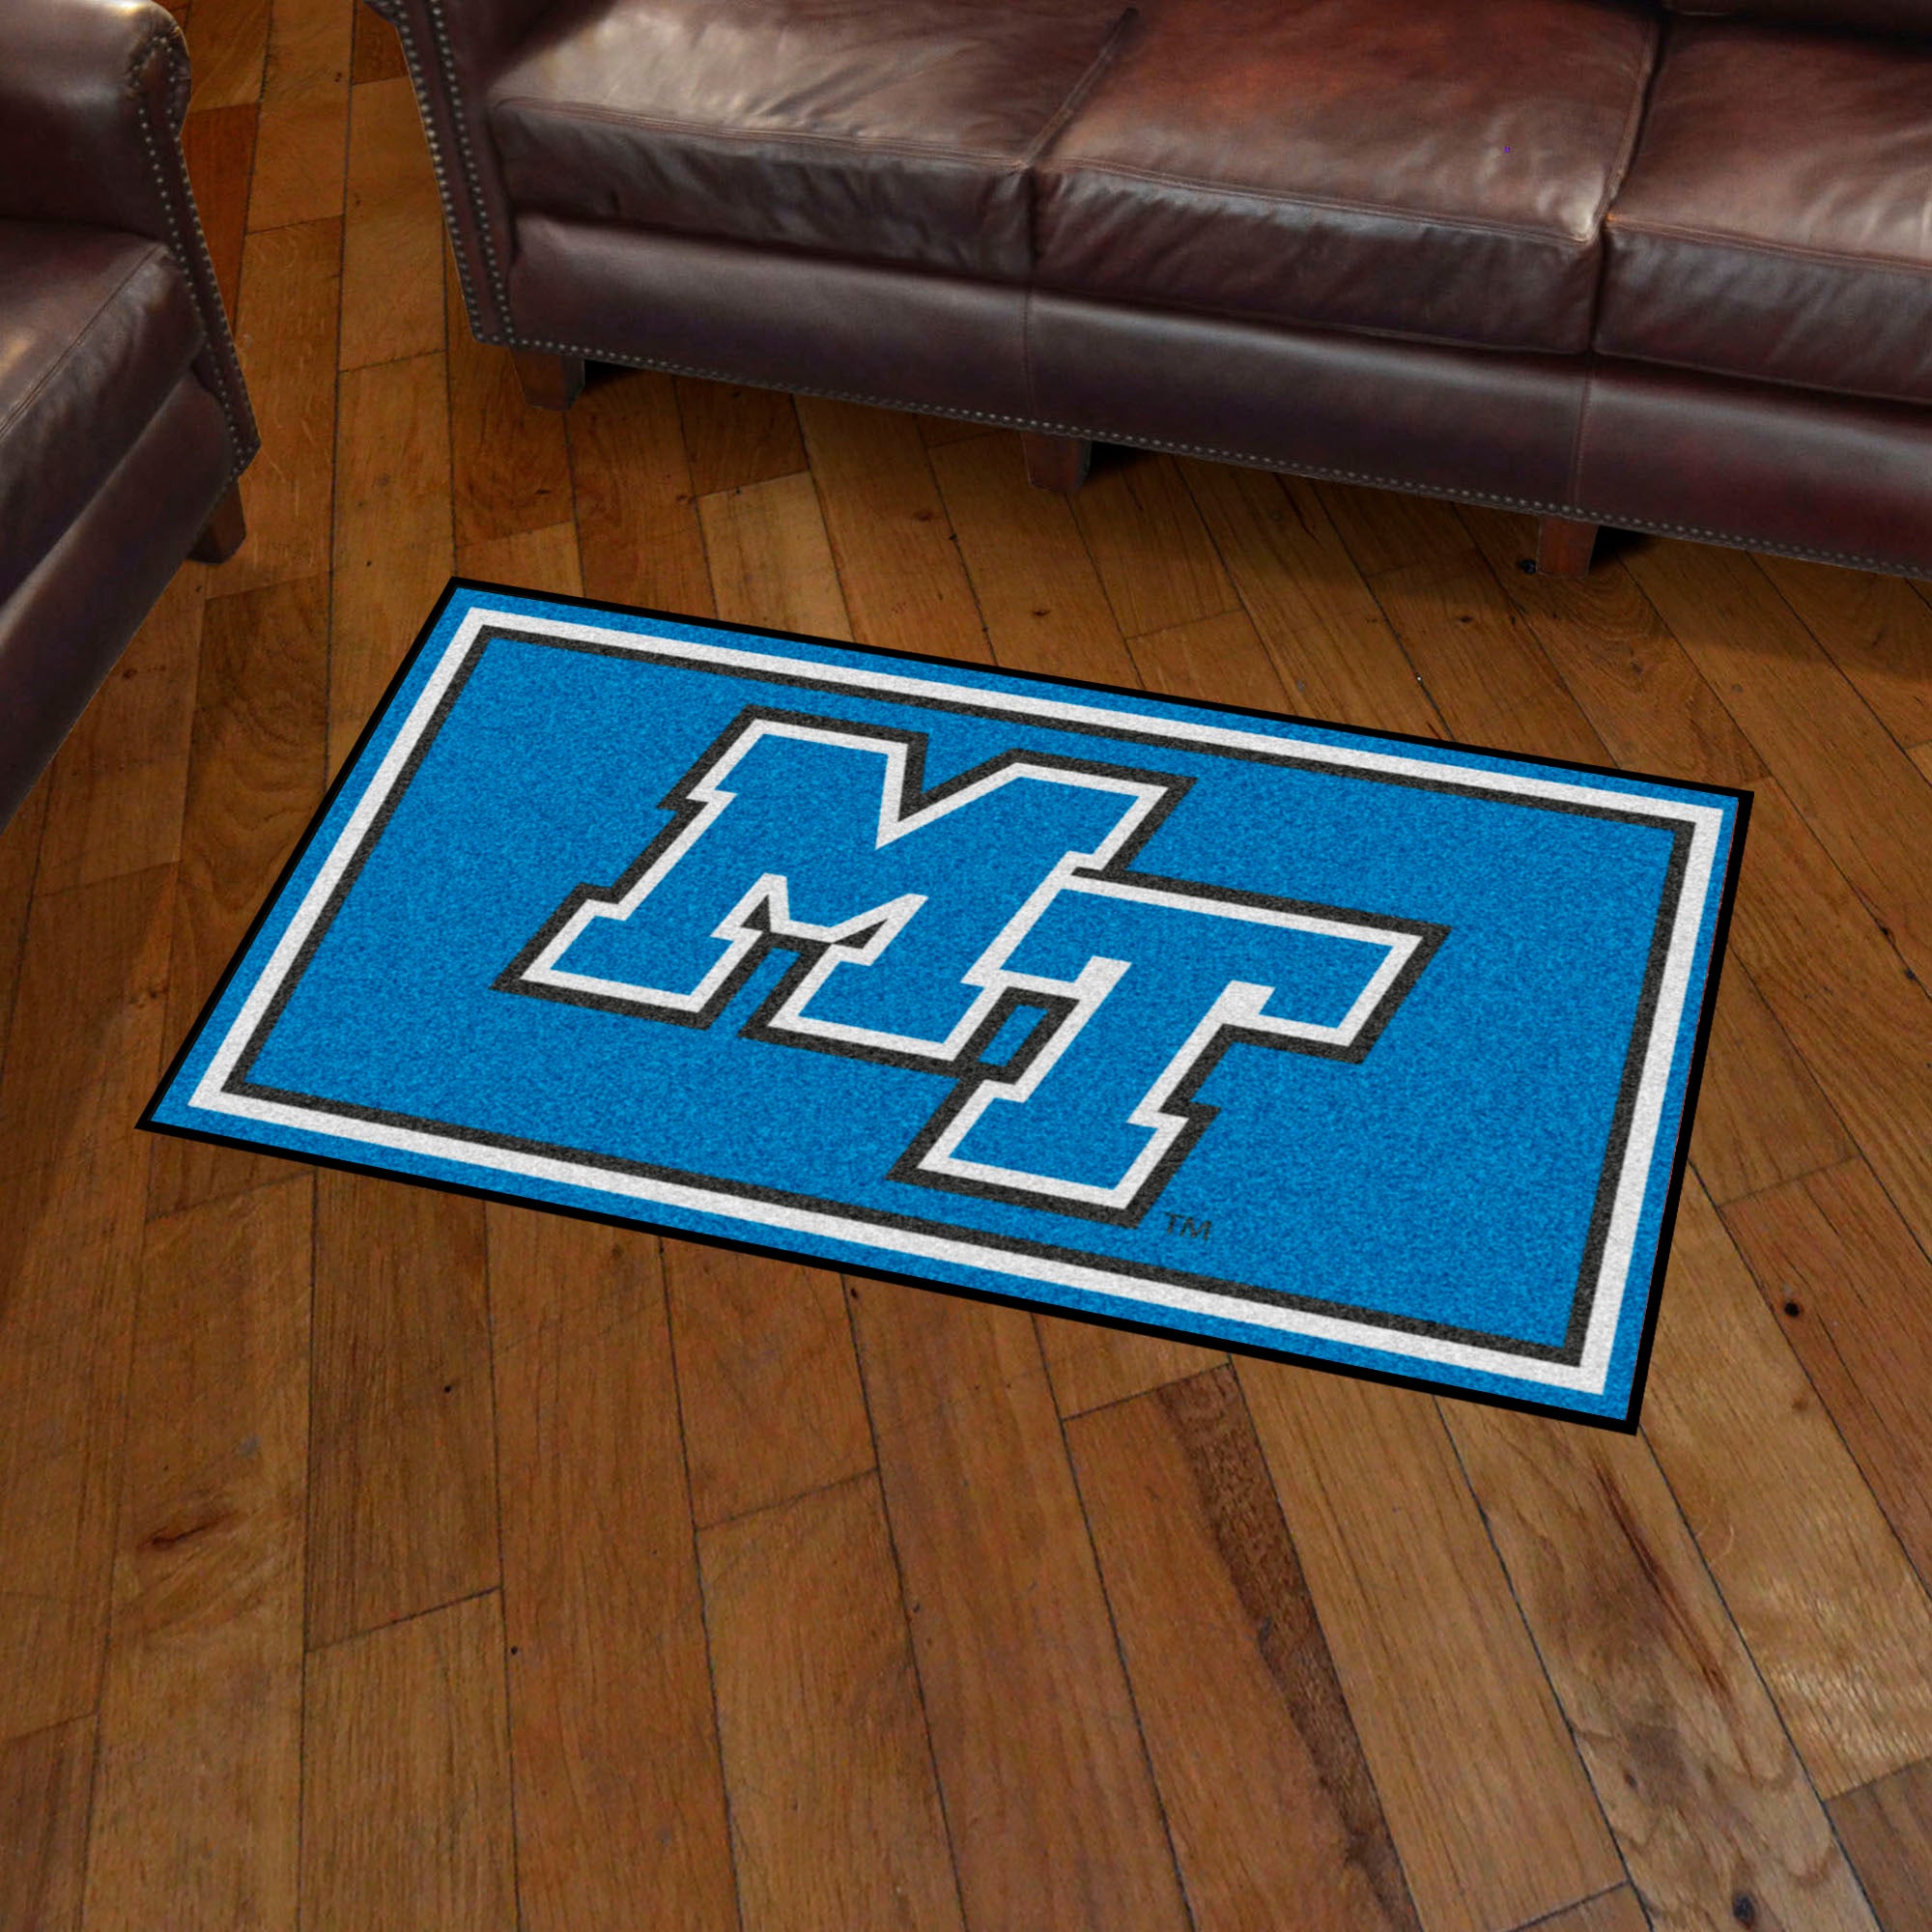 FANMATS, Middle Tennessee State University 3ft. x 5ft. Plush Area Rug